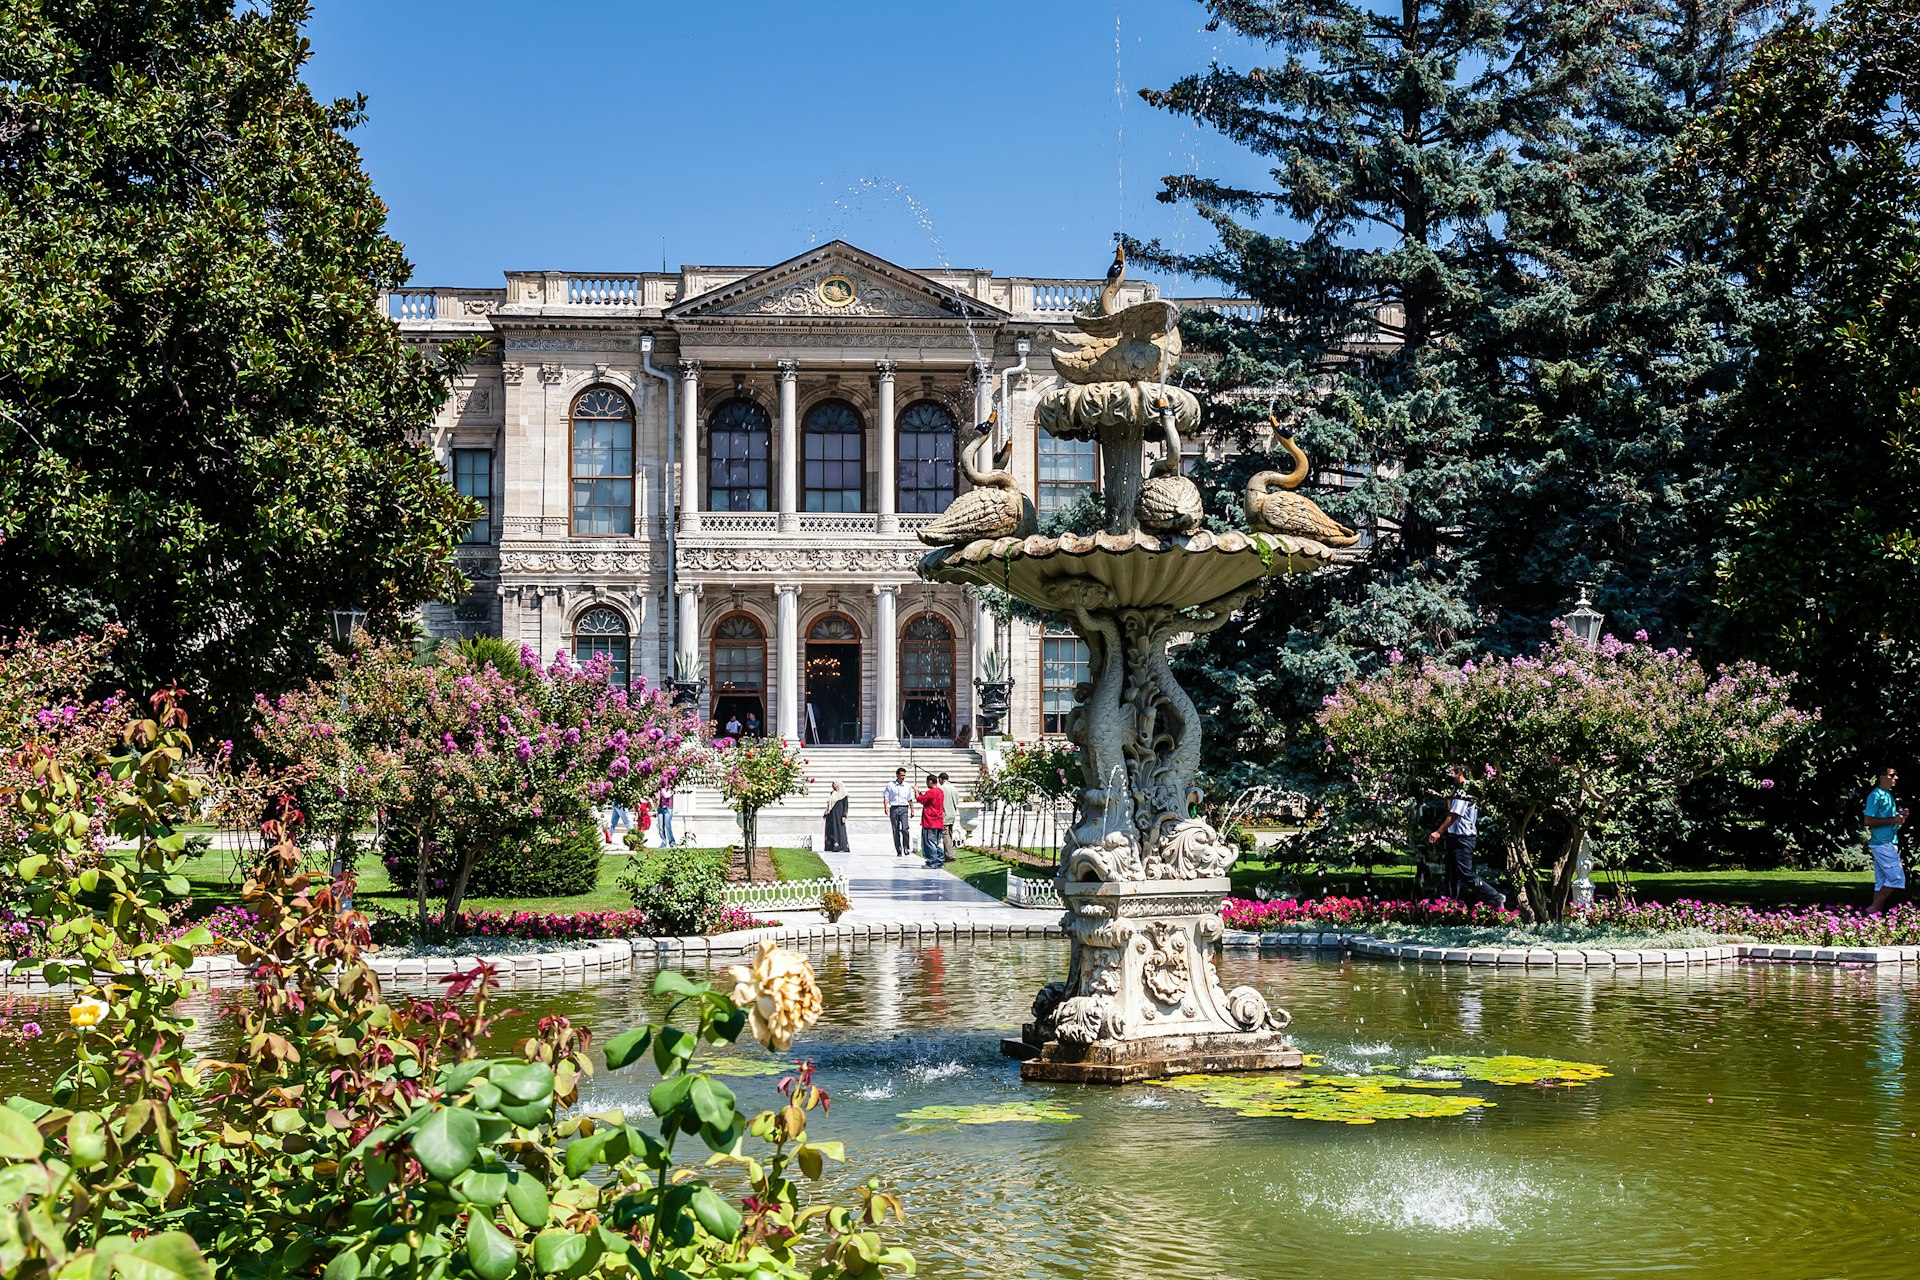 Beautiful fountain and gardens in front of Dolmabahçe Palace in Istanbul, Turkey